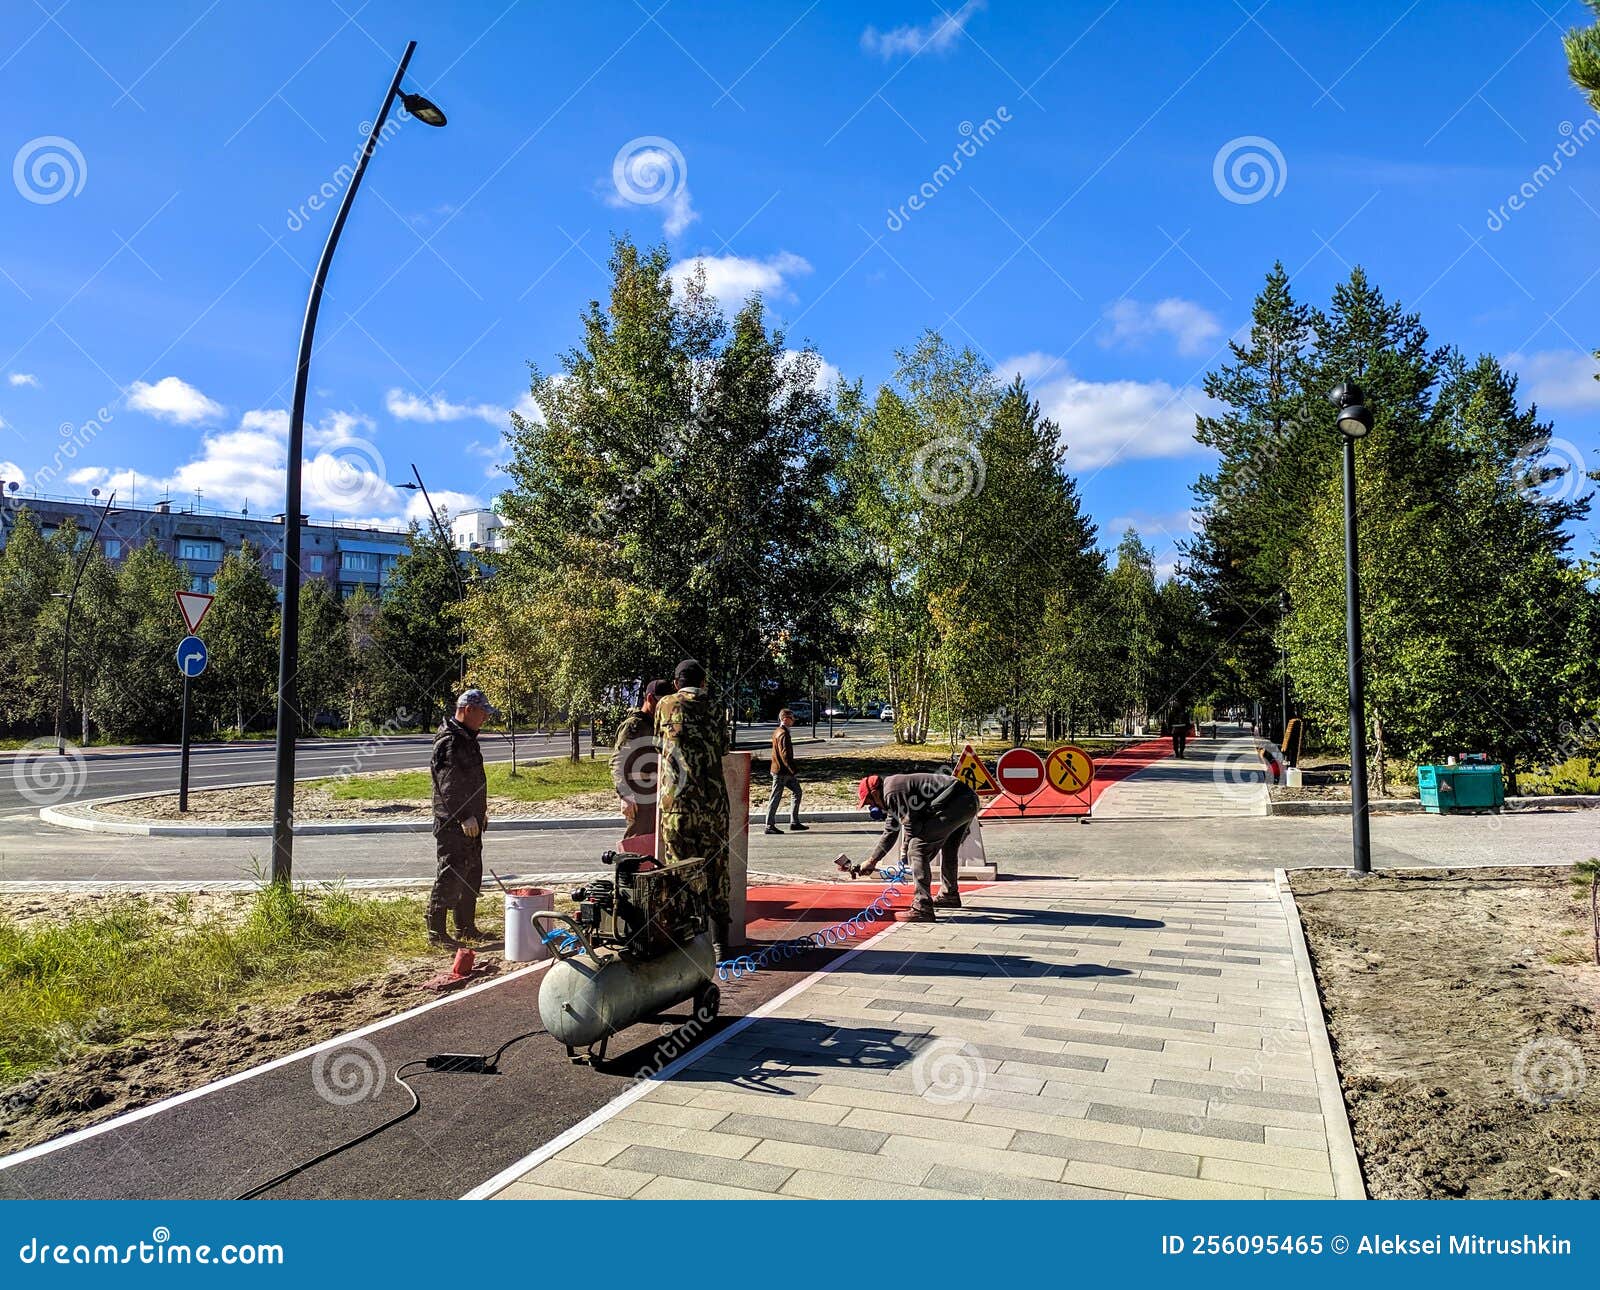 Noyabrsk, Russia - September 2, 2022: View of a City Street with a